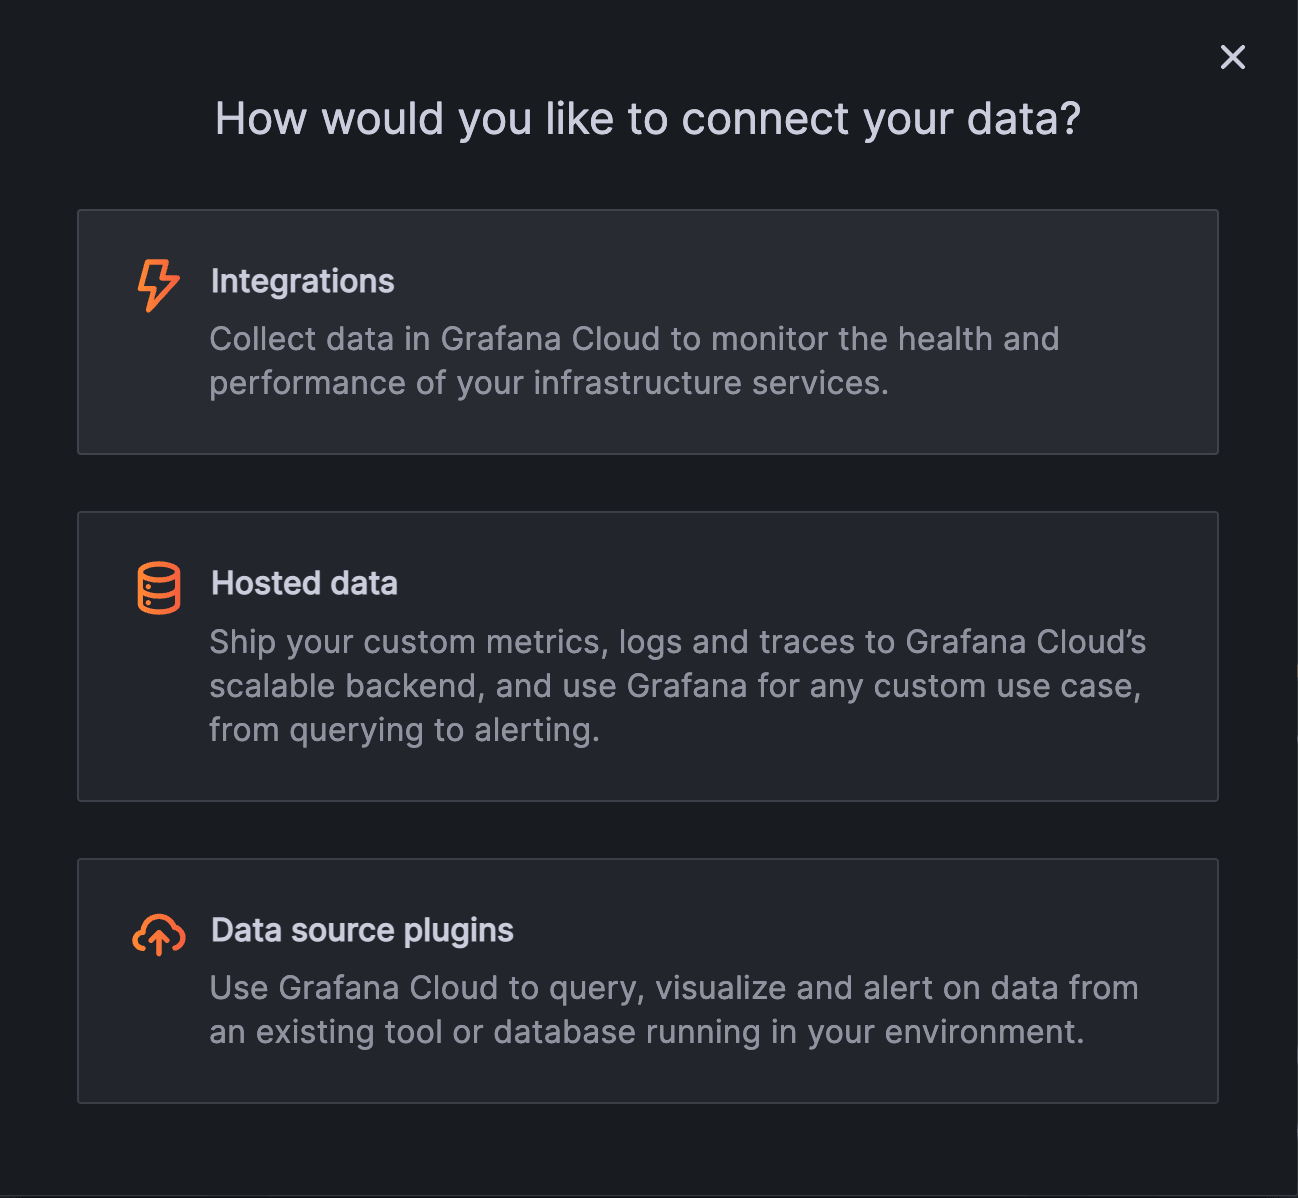 How to connect your data